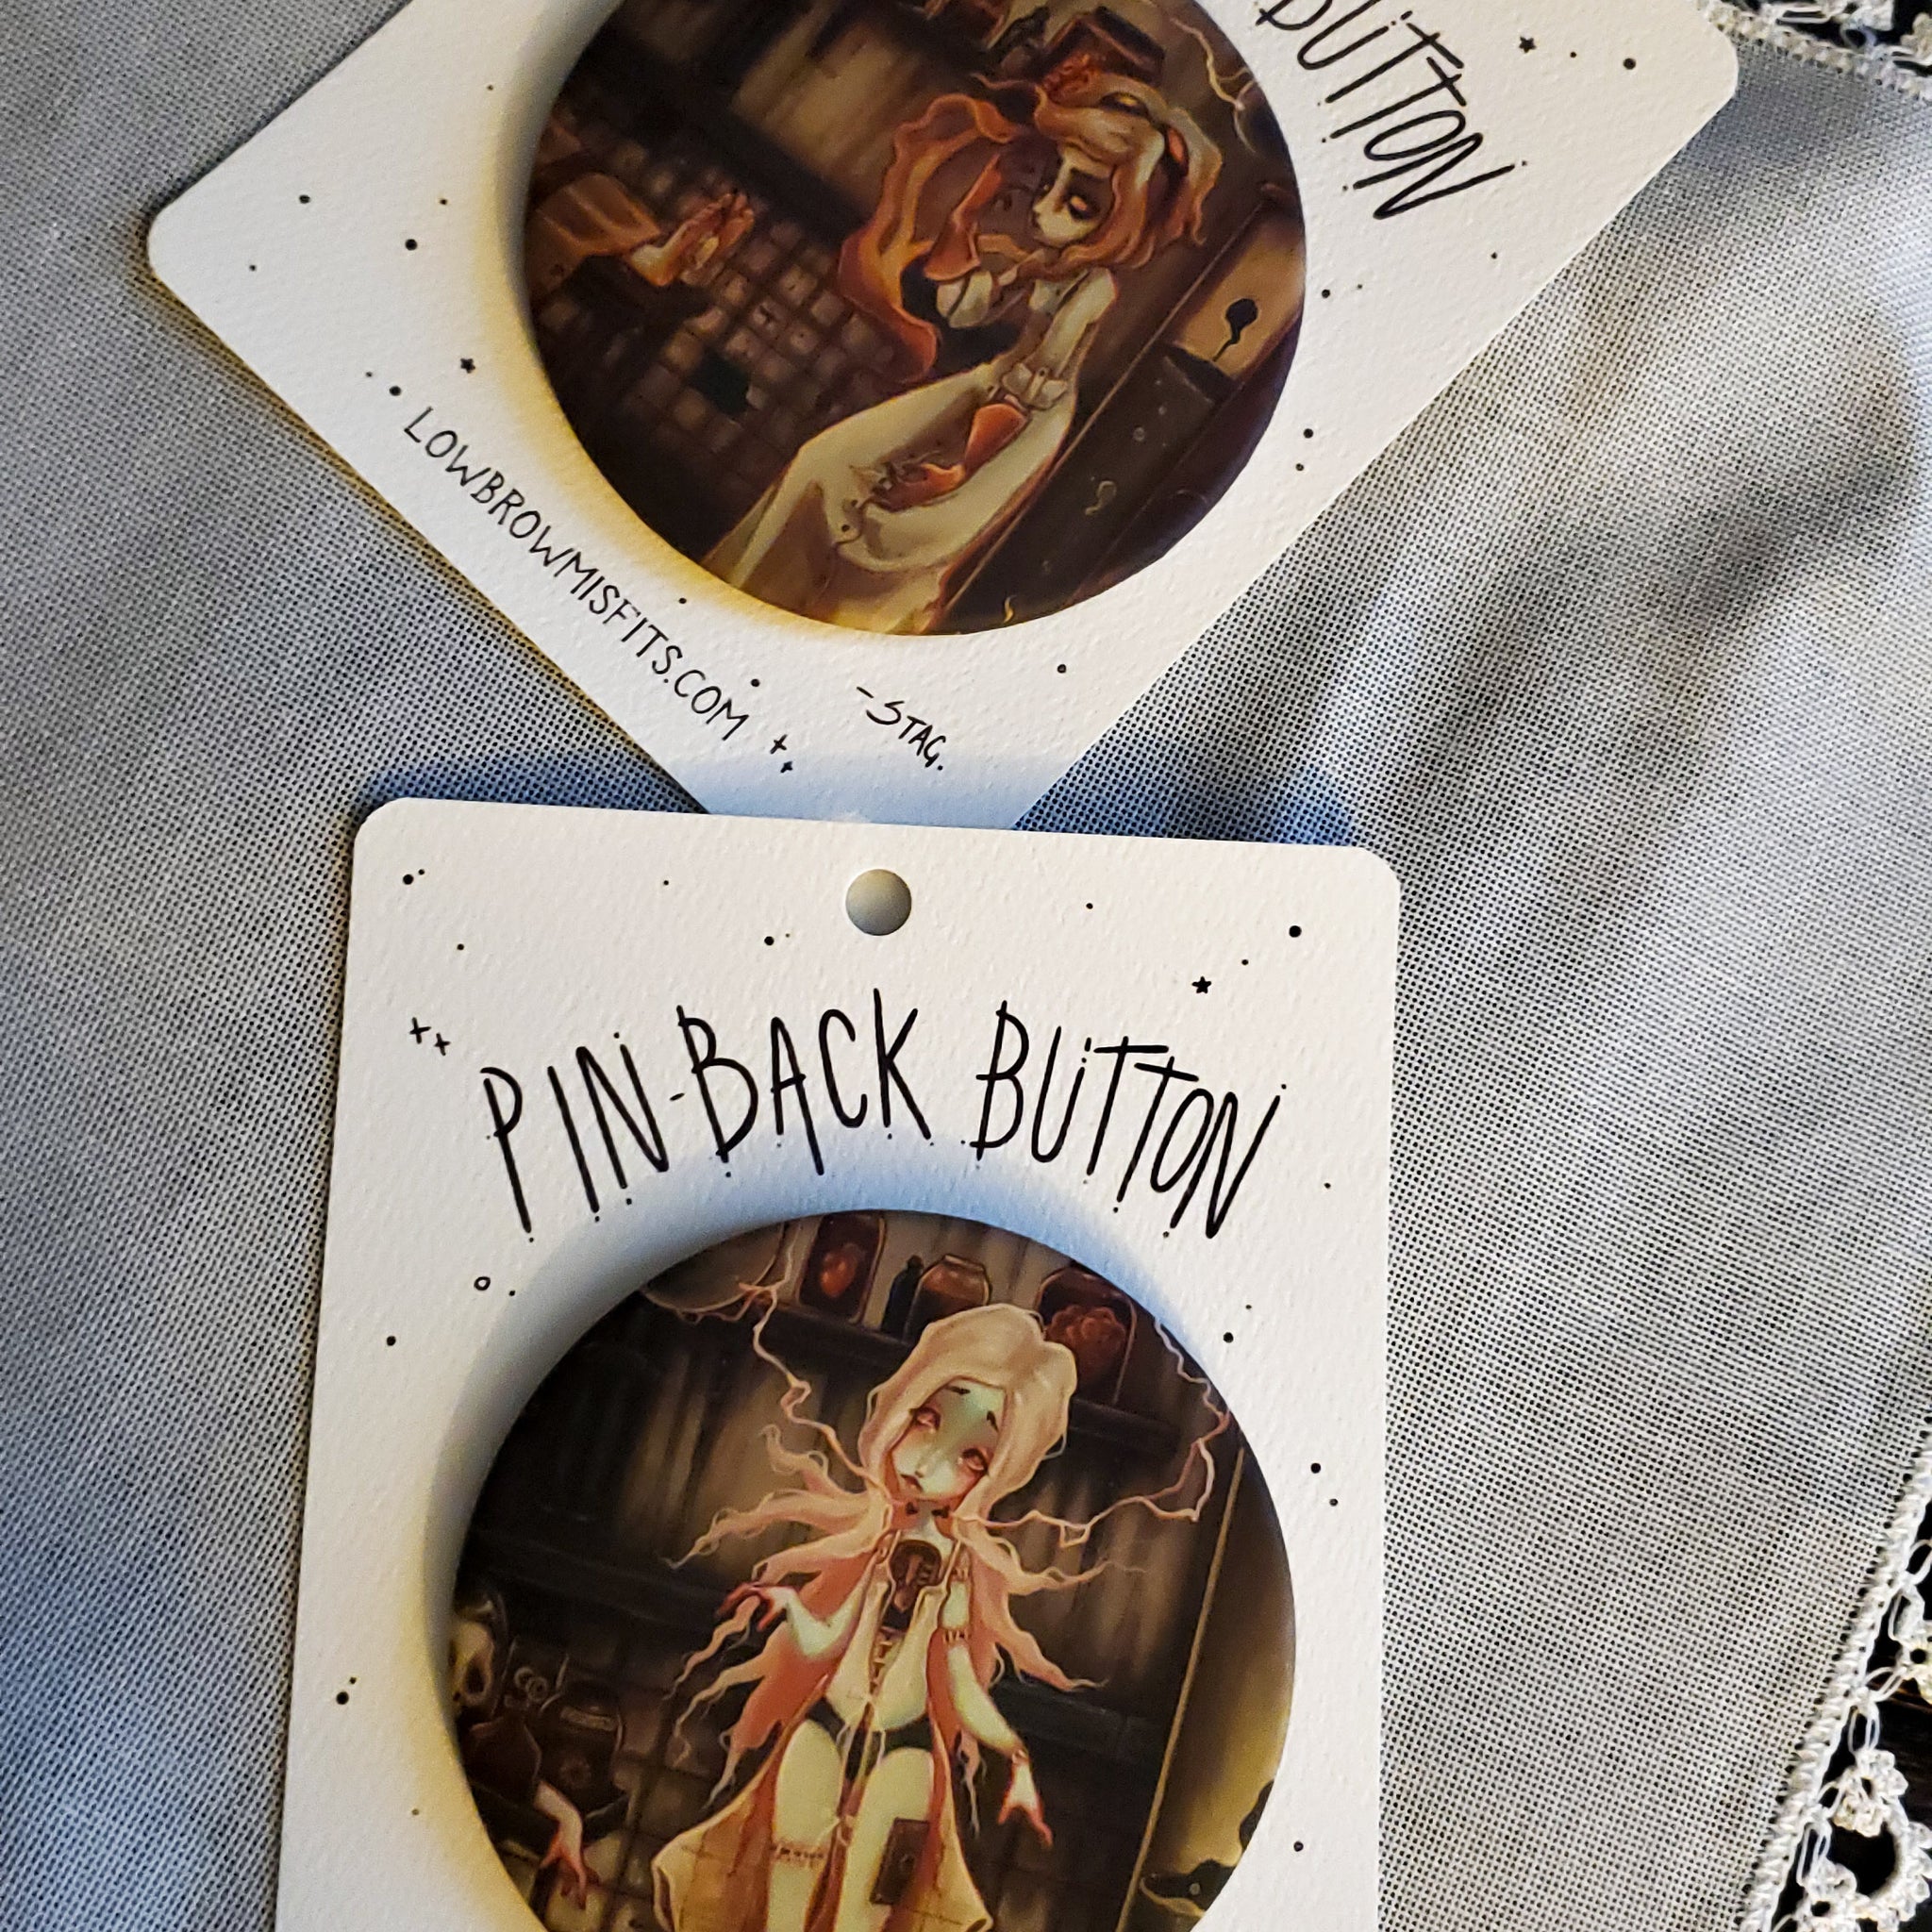 The Reanimator and Reanimated large pin back button